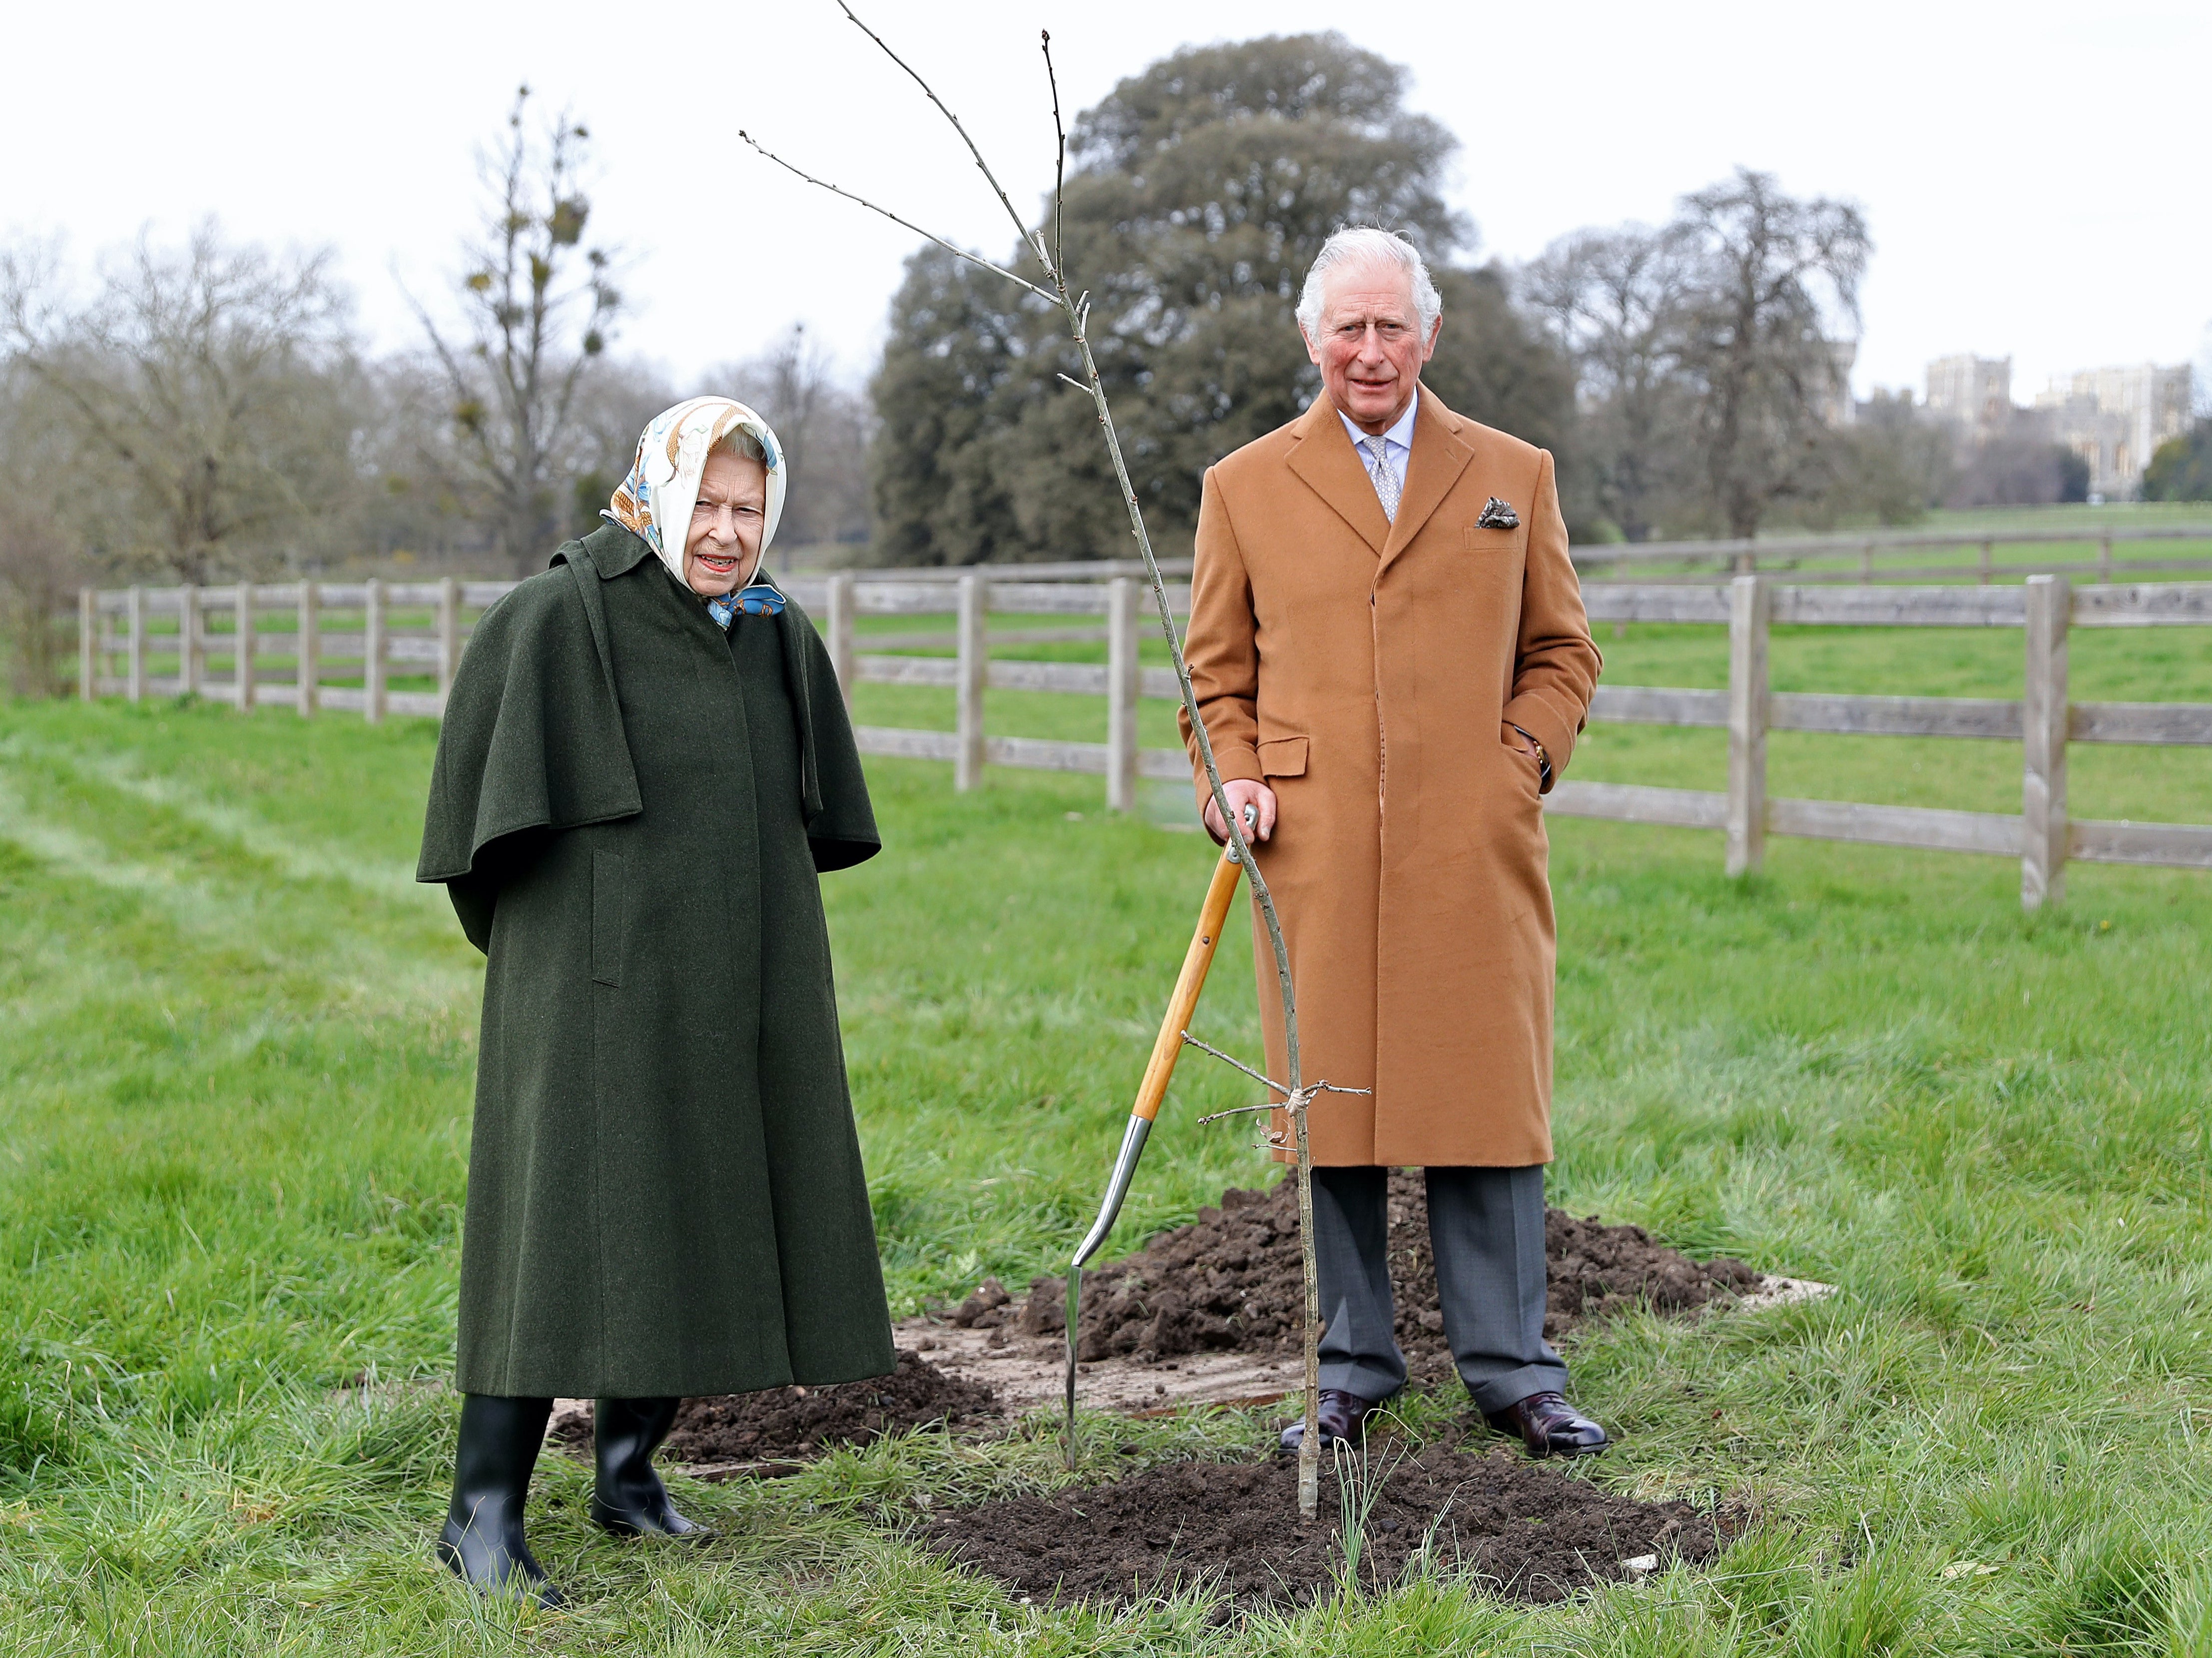 Queen and Prince Charles planting tree at Windsor earlier this year